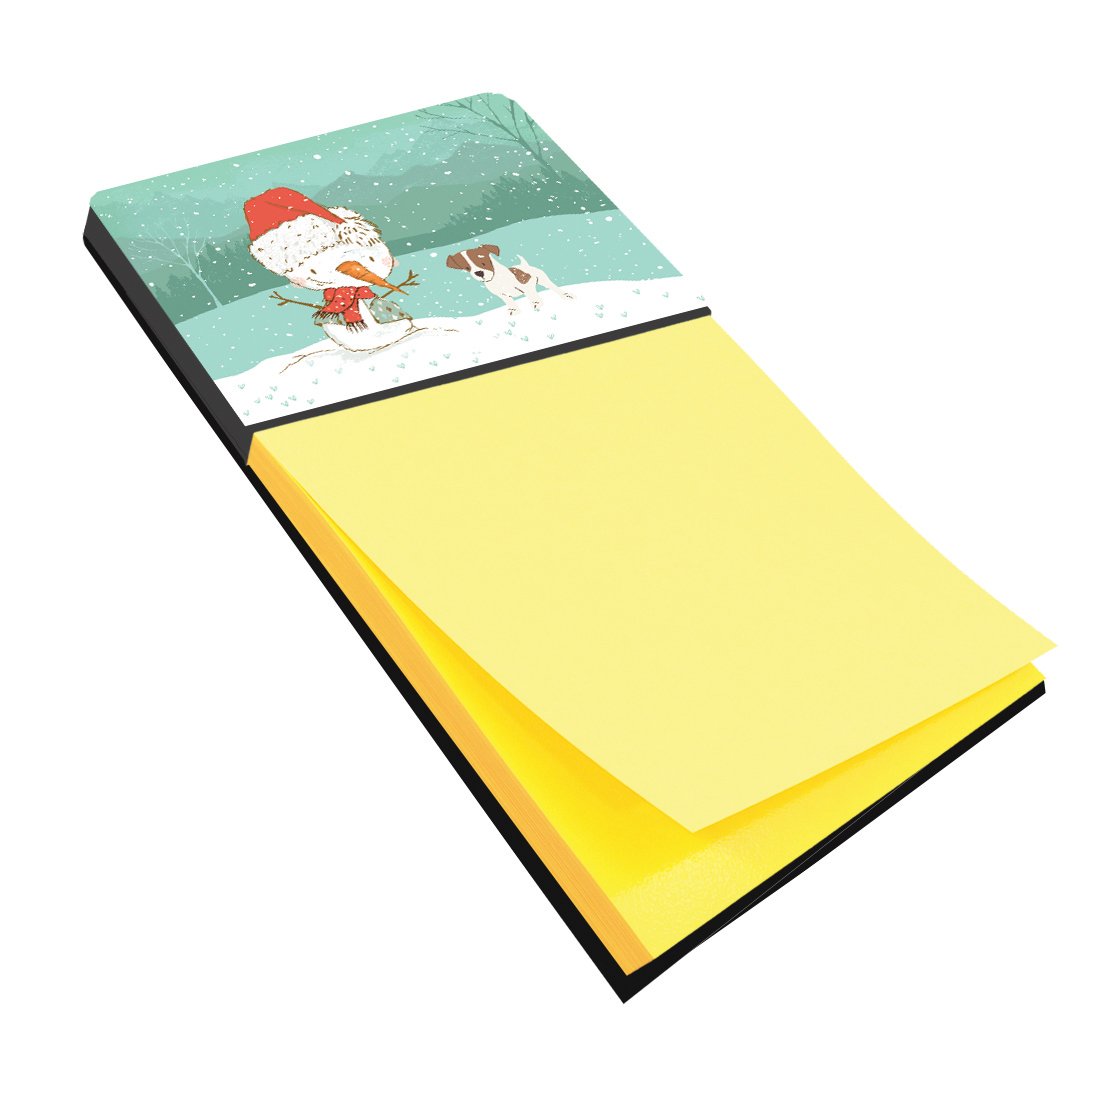 Jack Russell Terrier #2 Snowman Christmas Sticky Note Holder CK2091SN by Caroline's Treasures